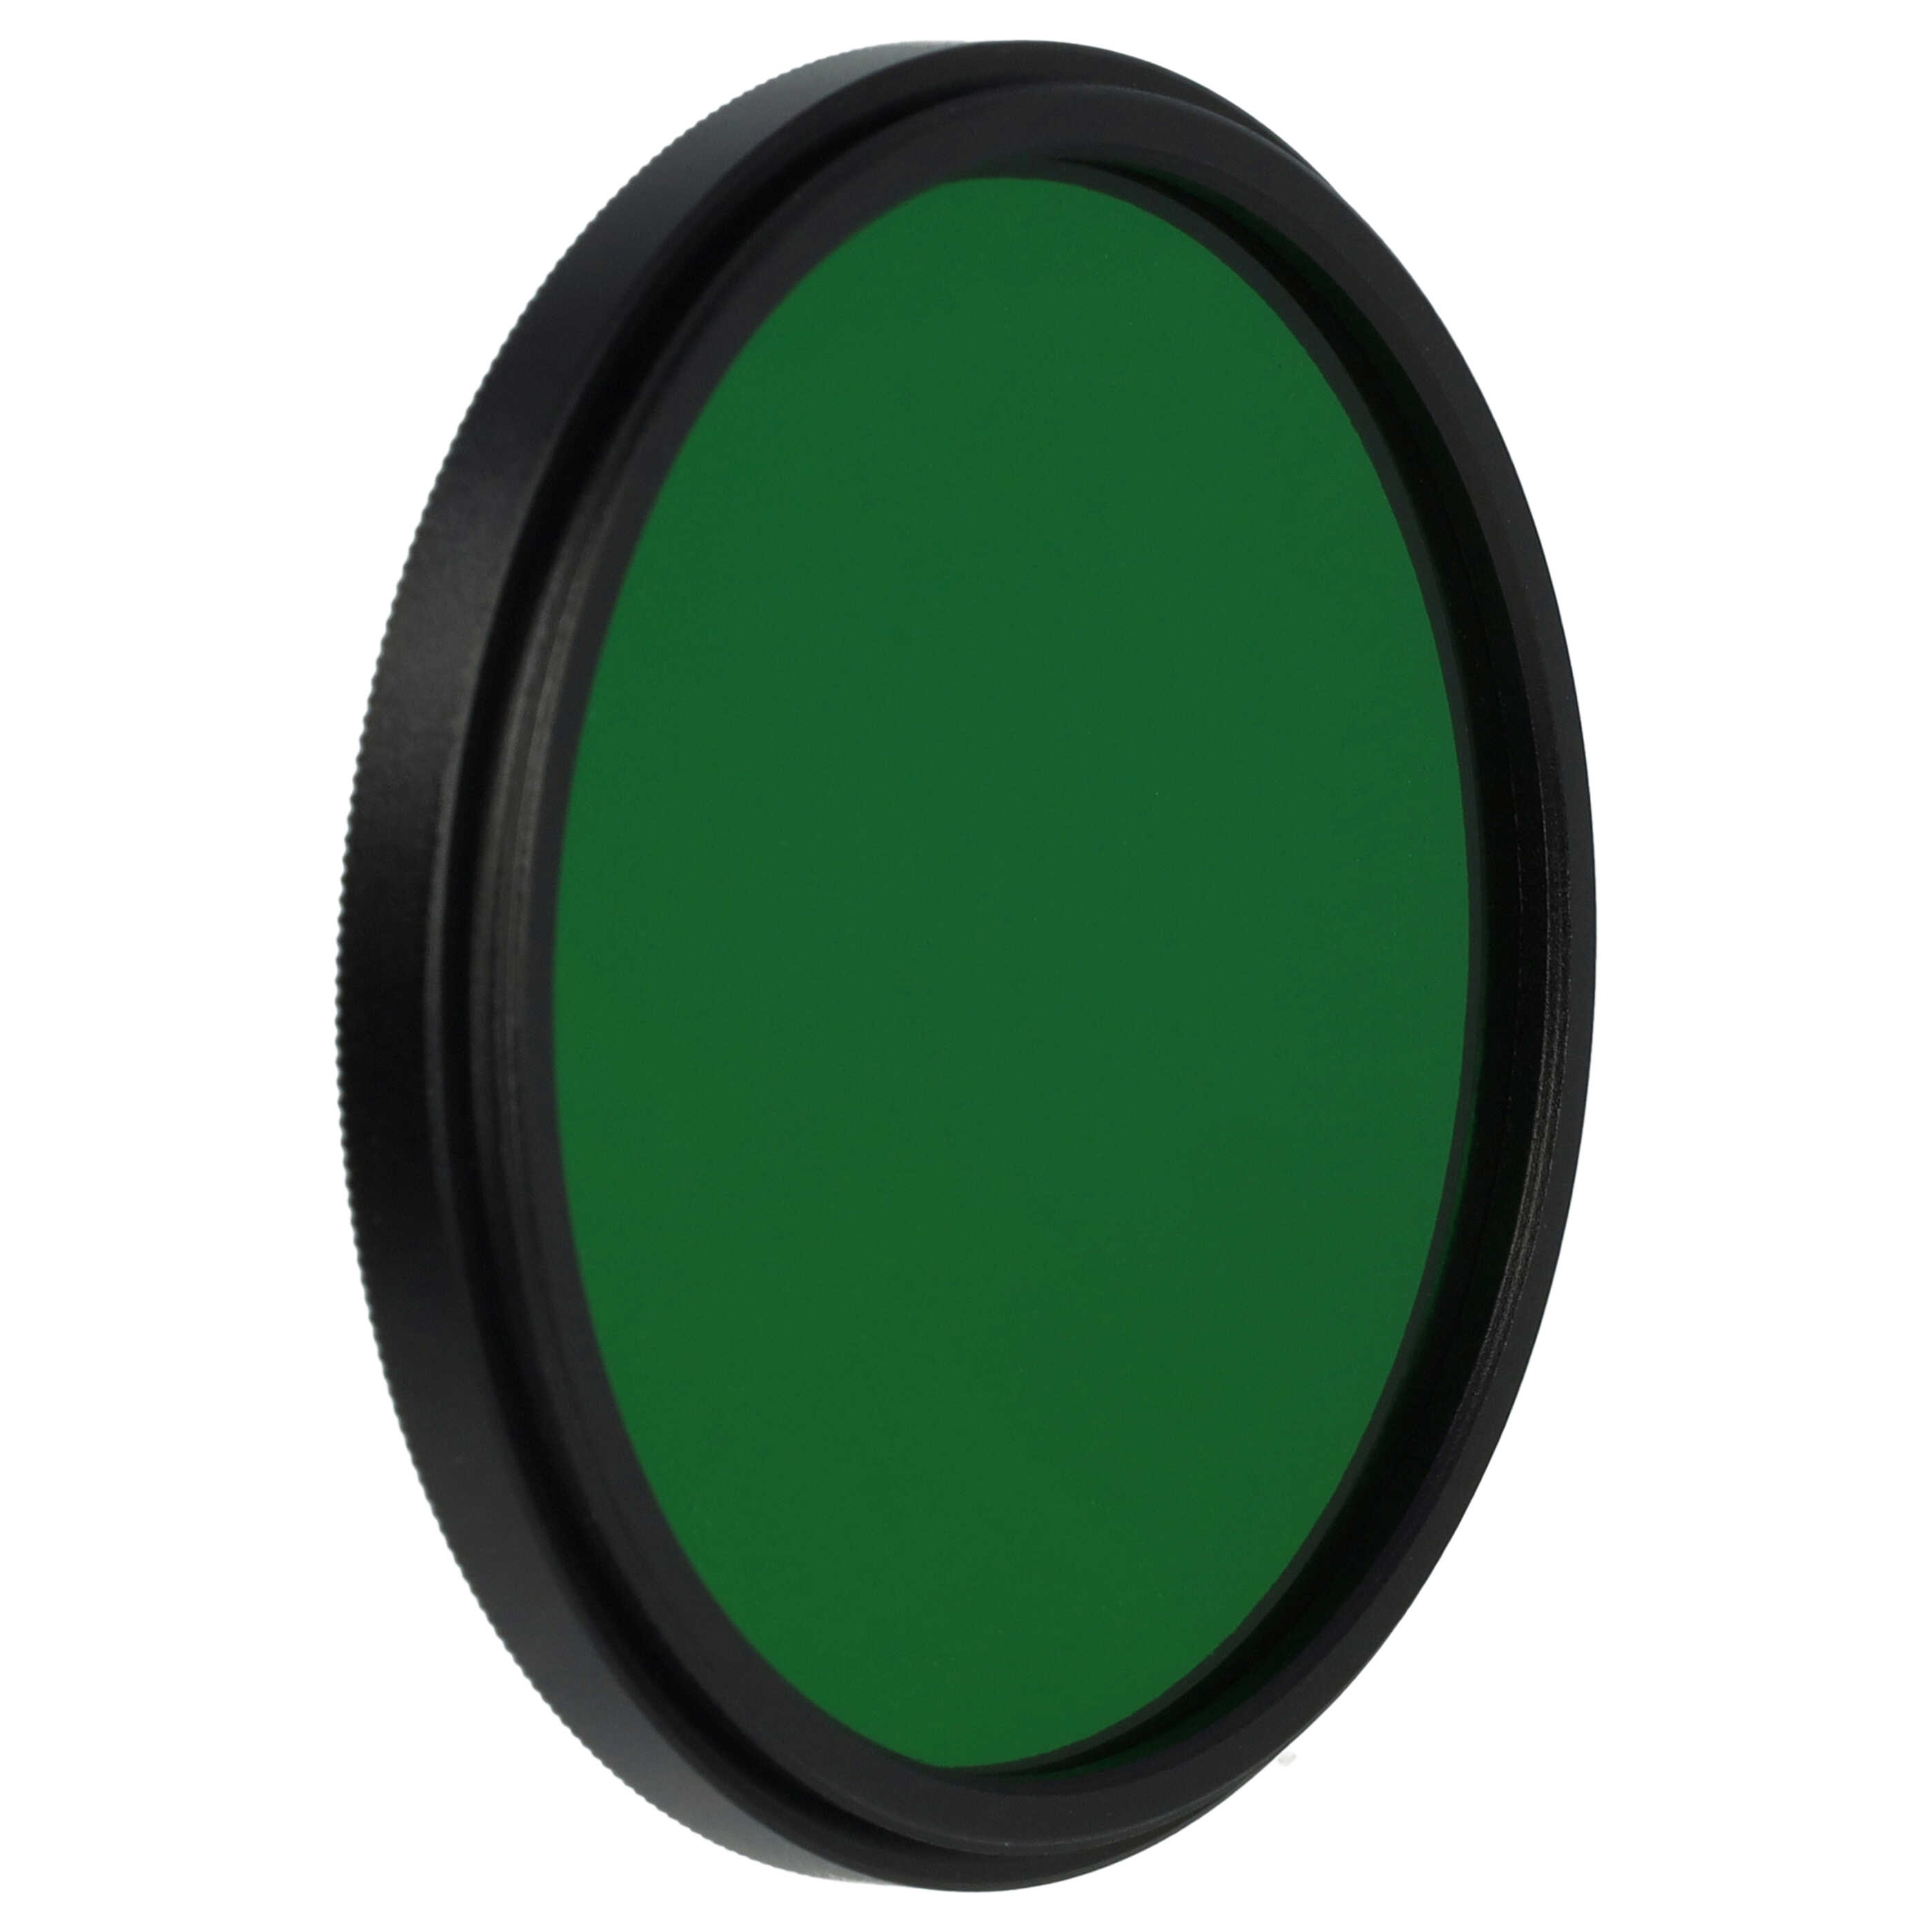 Coloured Filter, Green suitable for Camera Lenses with 55 mm Filter Thread - Green Filter